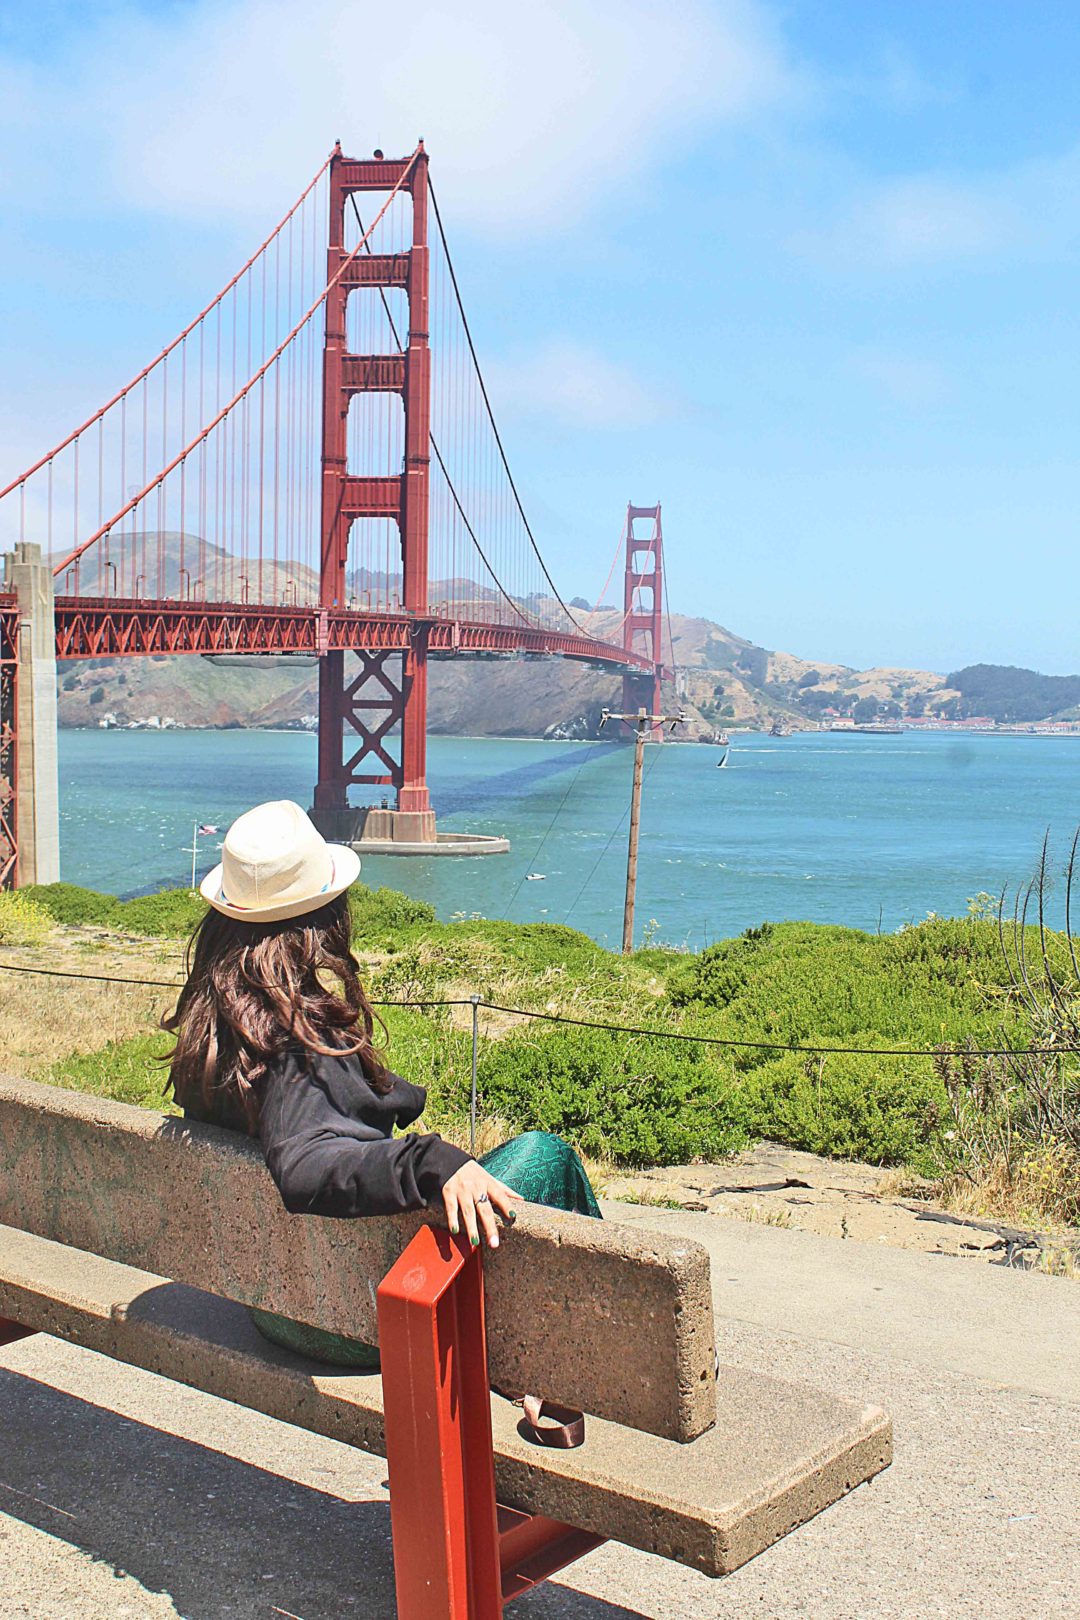 The Best Places to See & Photograph the Golden Gate Bridge - California  Through My Lens